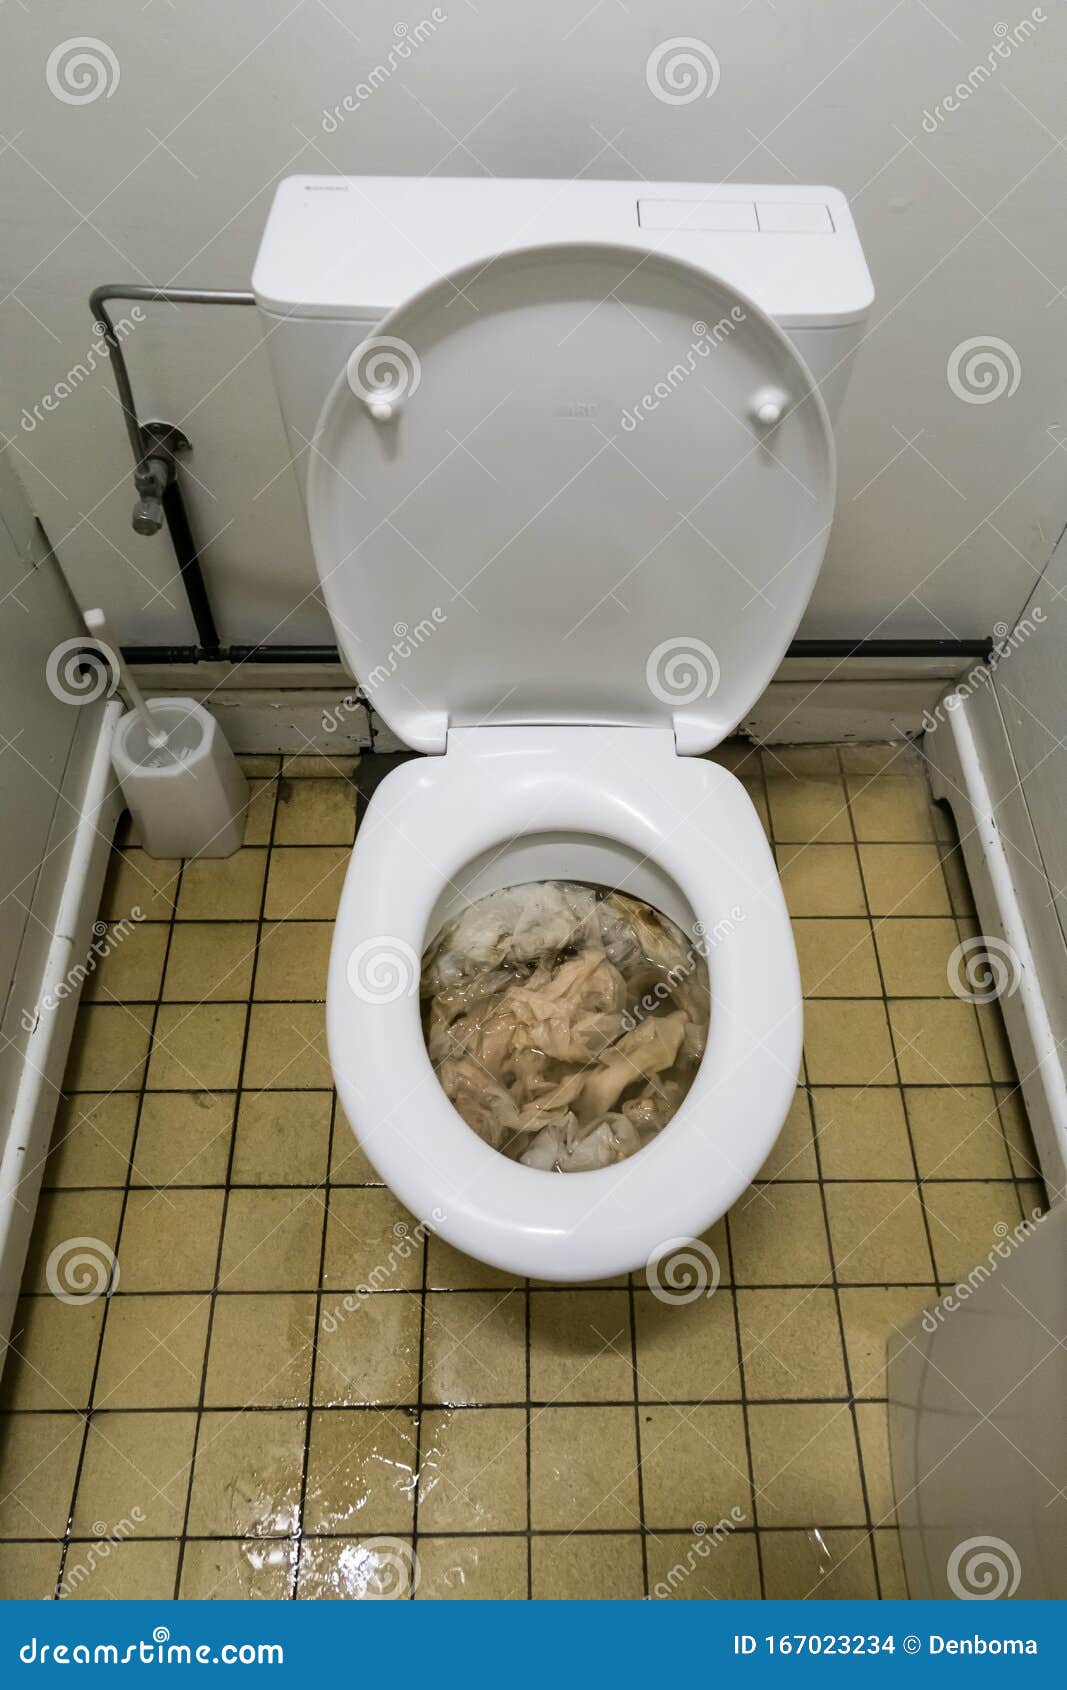 https://thumbs.dreamstime.com/z/public-toilet-clogged-ladies-too-much-paper-has-been-used-167023234.jpg